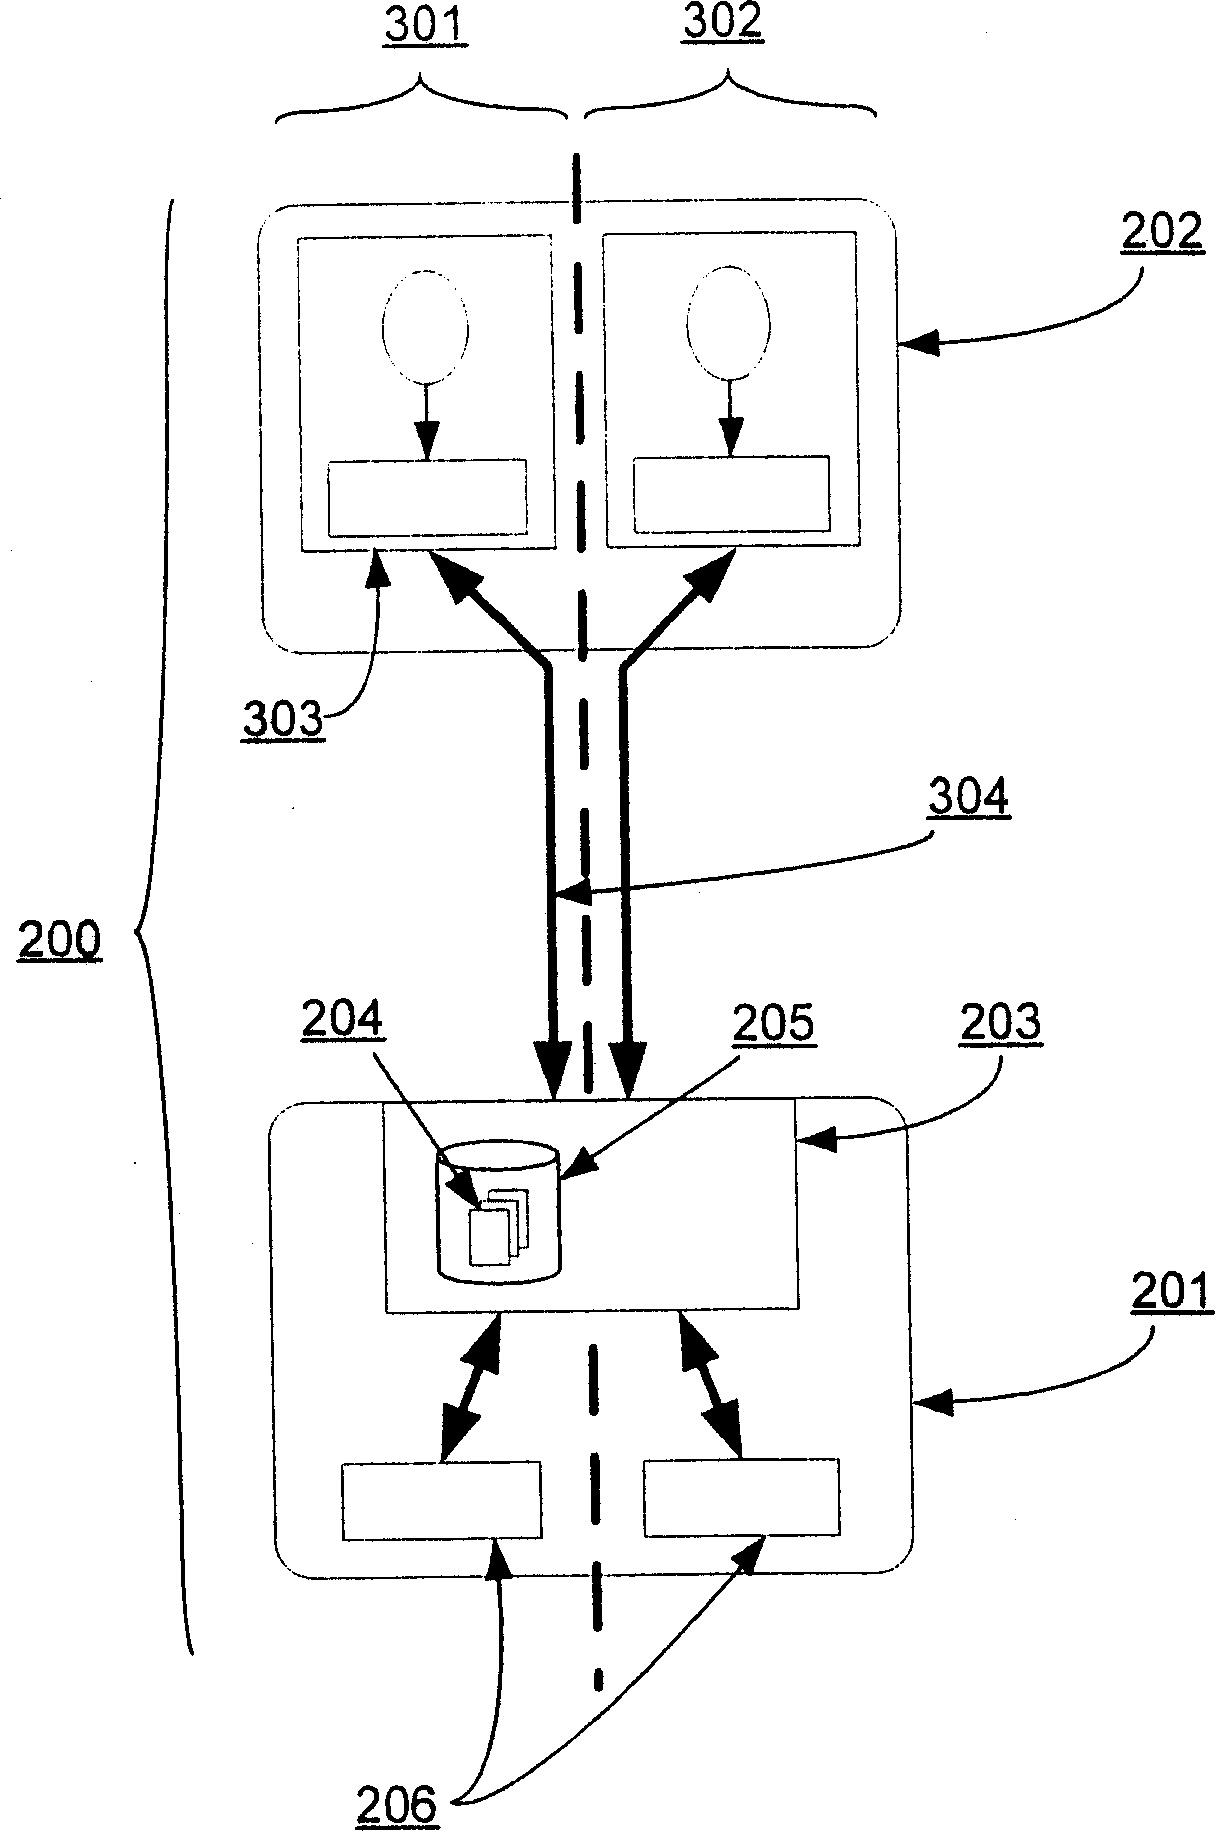 Labeling gateway for compartmented multi-operator network elements over heterogeneous network